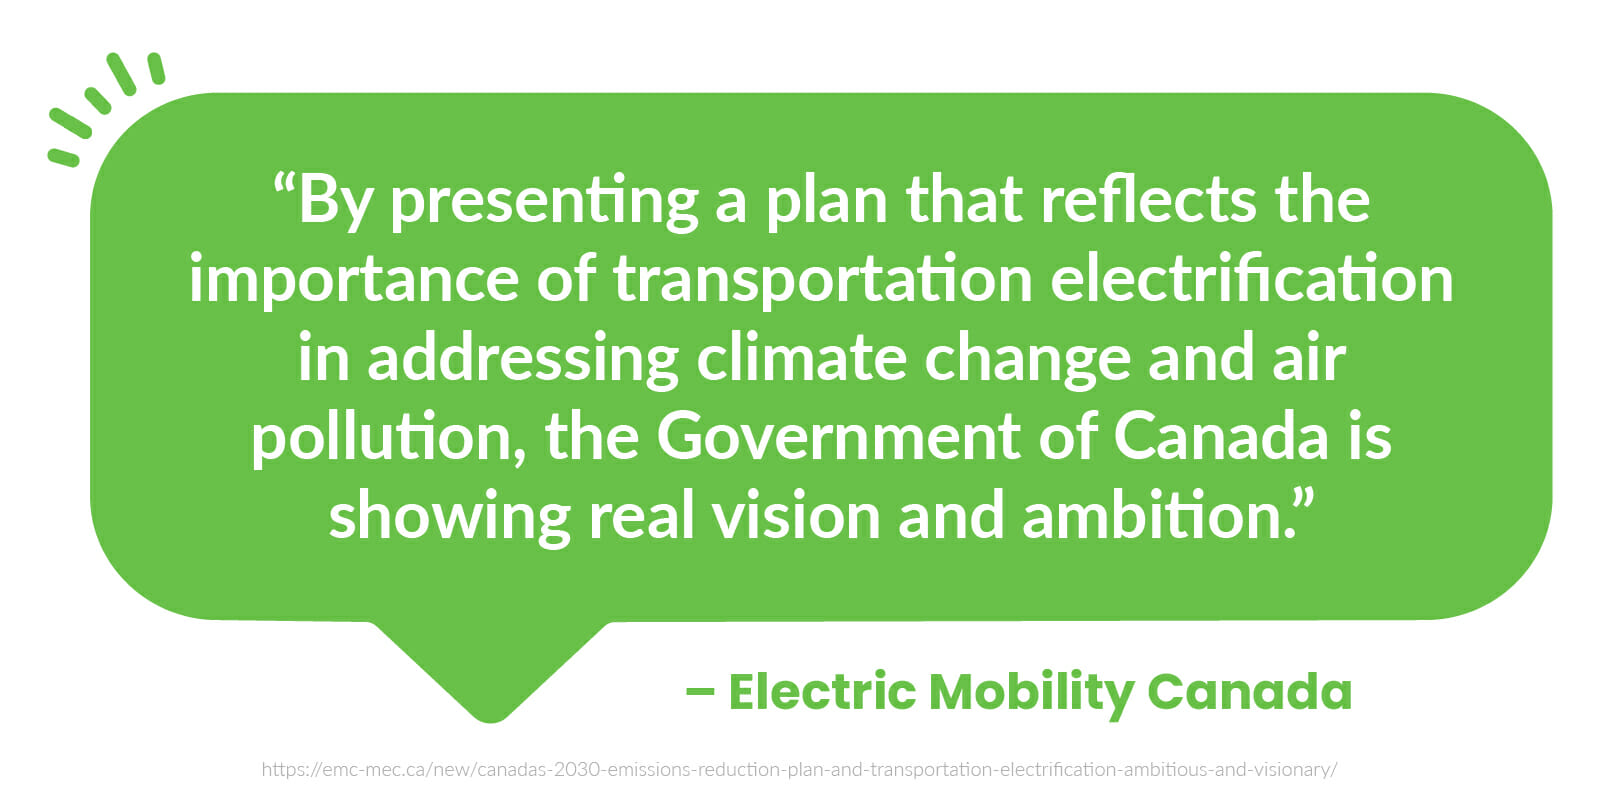  “By presenting a plan that reflects the importance of transportation electrification in addressing climate change and air pollution, the Government of Canada is showing real vision and ambition.” - Electric Mobility Canada